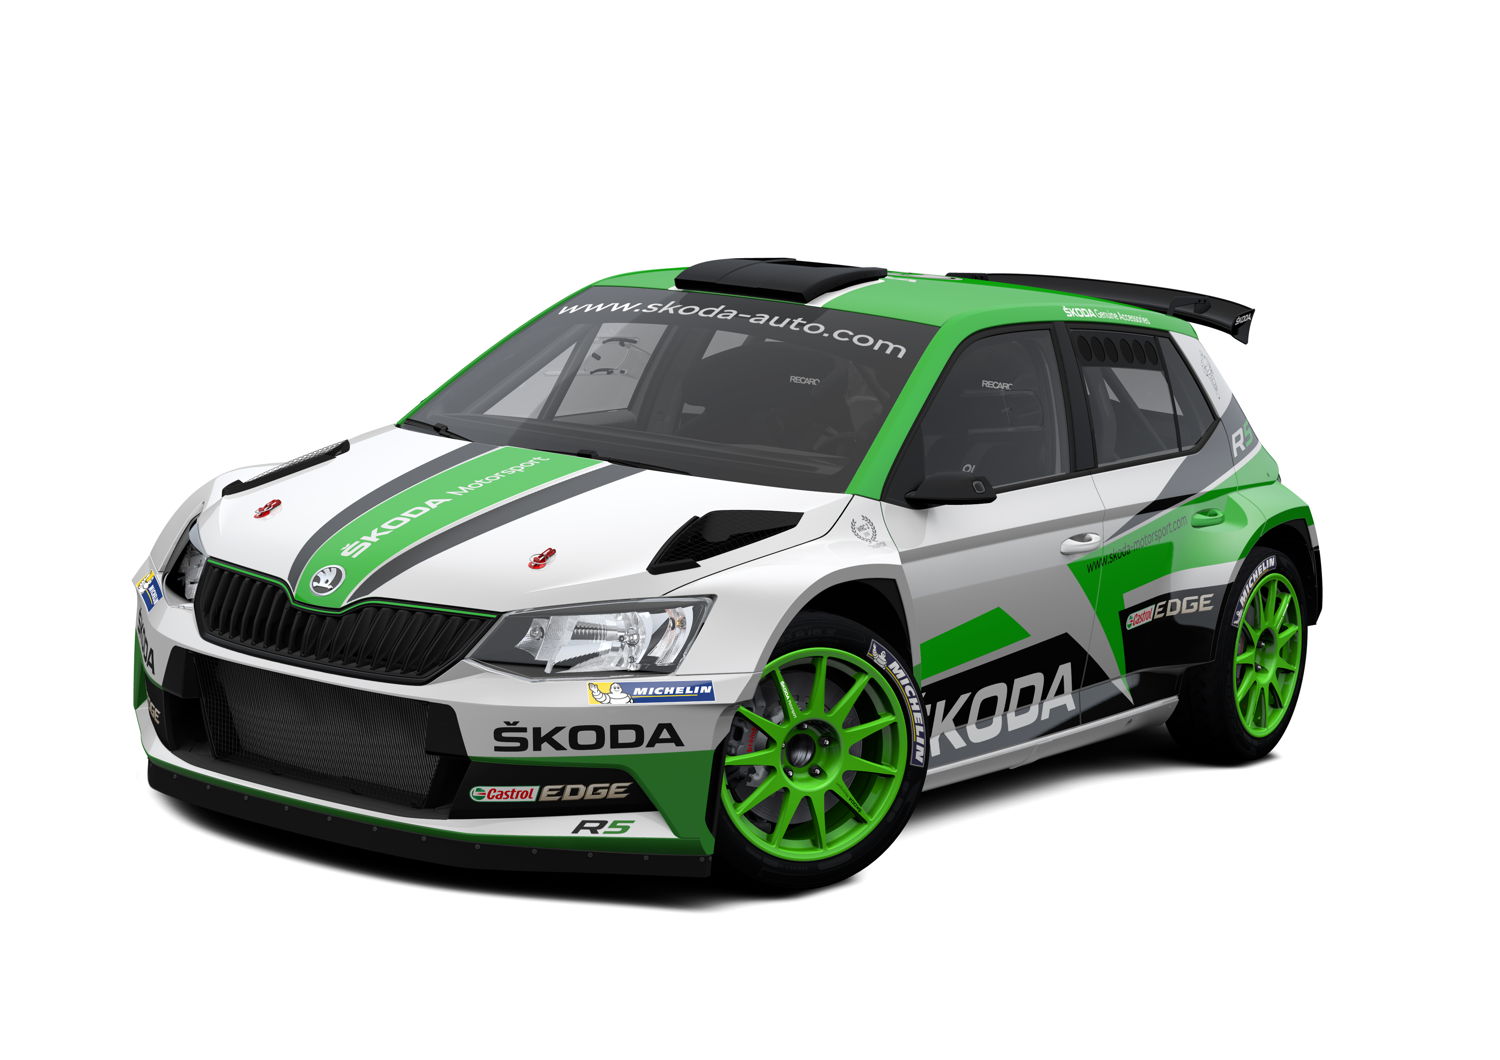 The FABIA R5 of the ŠKODA Motorsport works team will sport the new design for the first time in Sweden.